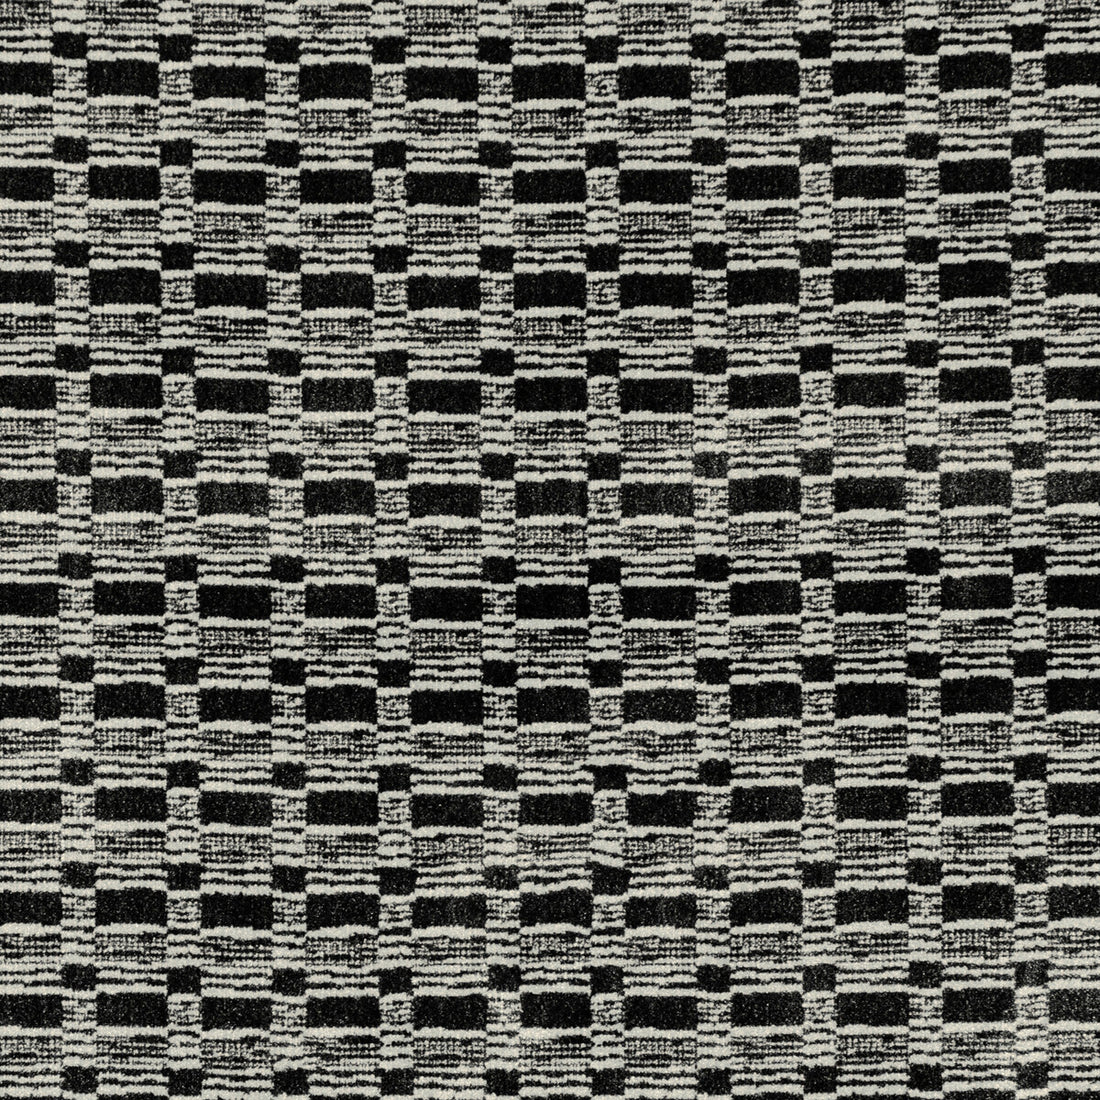 Lure fabric in onyx/ivory color - pattern GWF-3760.81.0 - by Lee Jofa Modern in the Kelly Wearstler VI collection